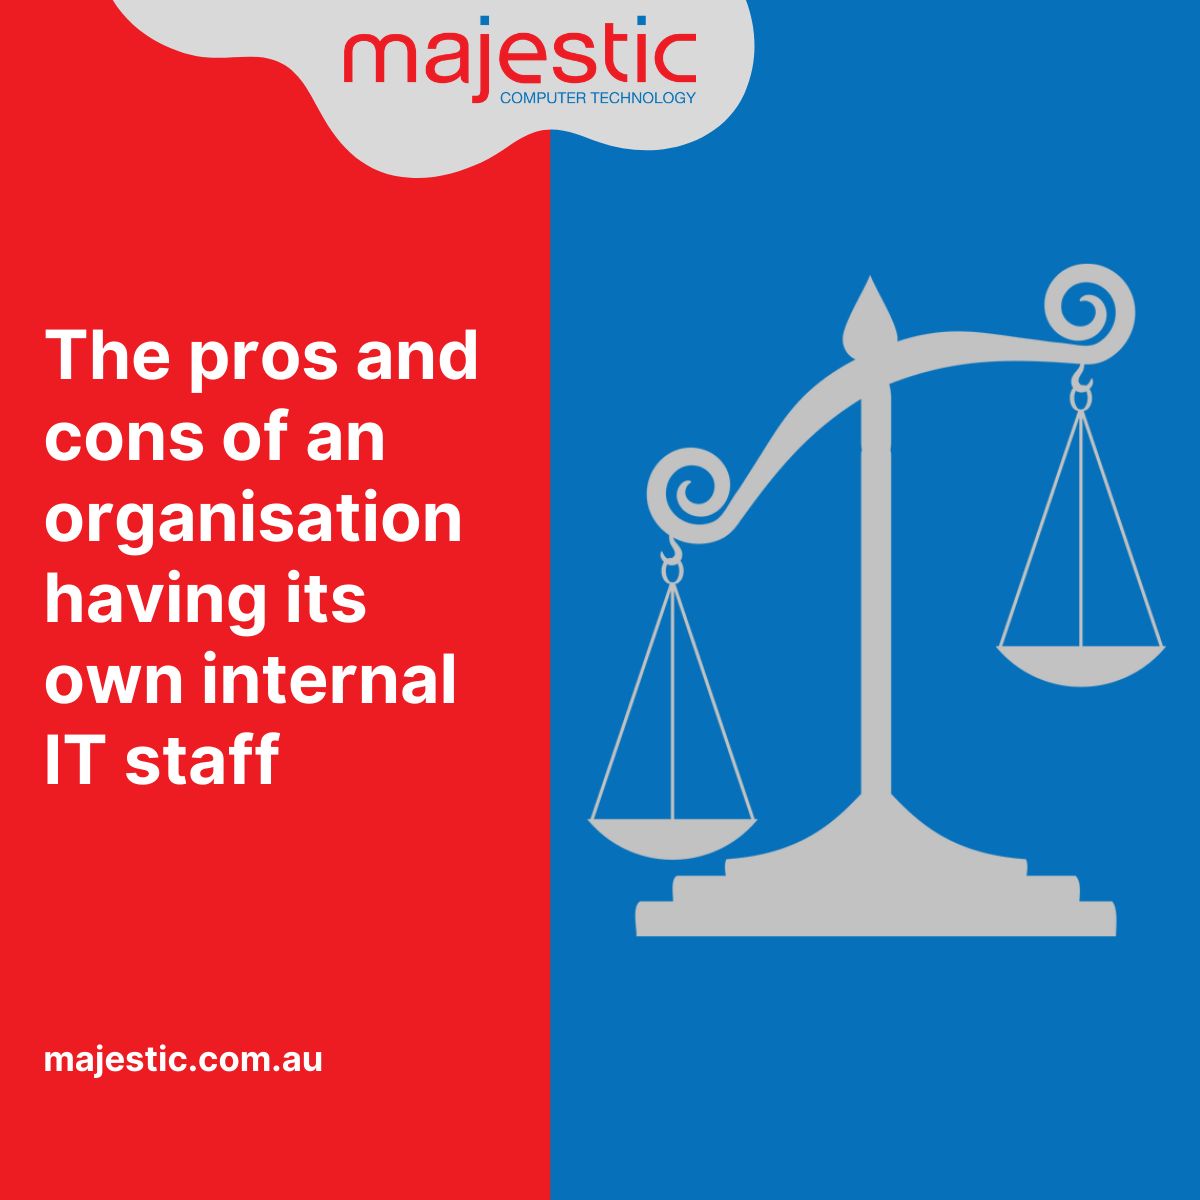 The pros and cons of an organisation having its own internal IT staff